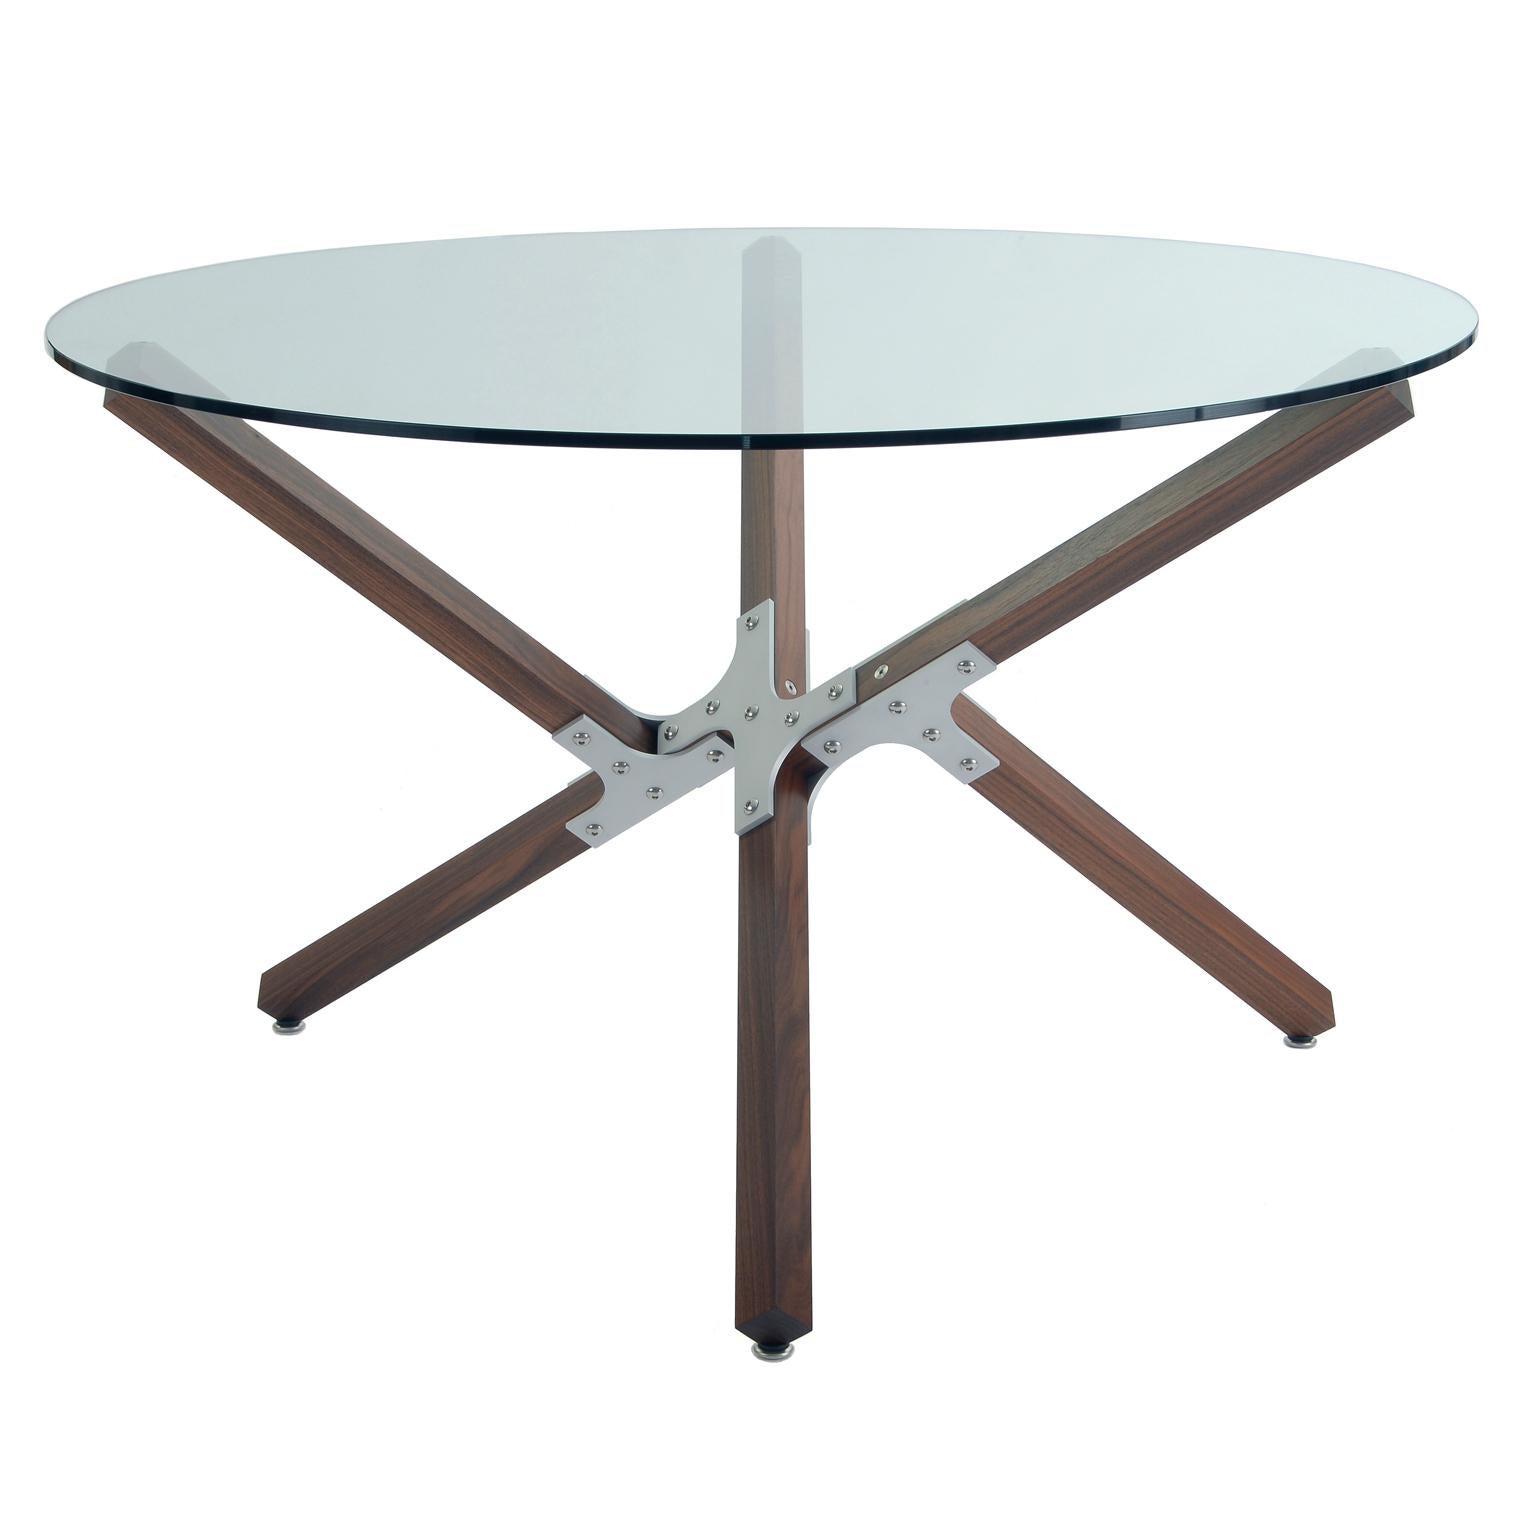 Minimal Industrial Dining Table by Peter Harrison Glass Top Wood and Metal